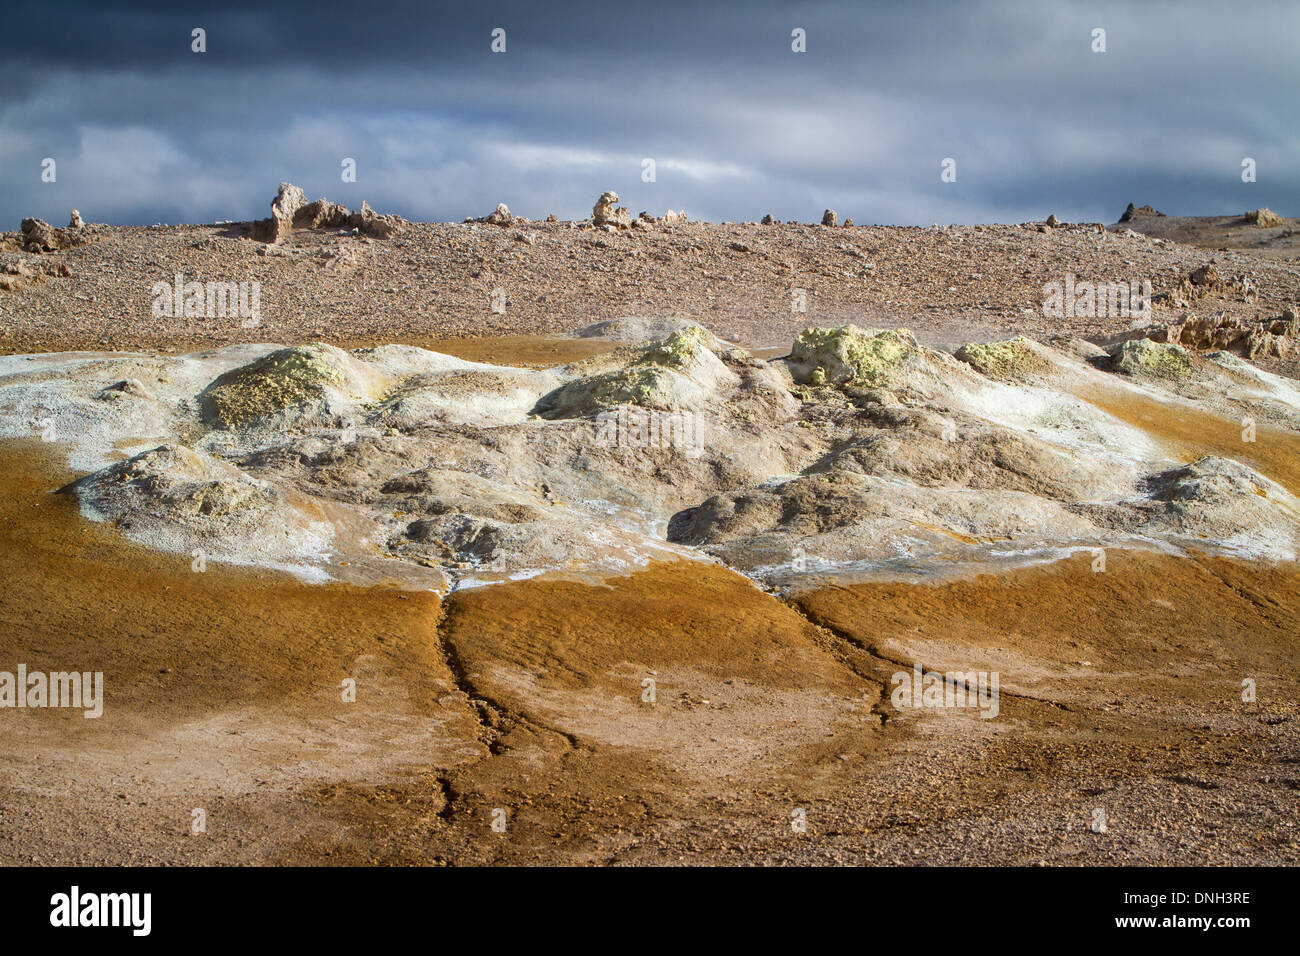 GEOTHERMAL ZONE OF NAMAFJALL, VOLCANIC BULGE NEAR LAKE MYVATN, IN THE VOLCANIC SYSTEM OF KRAFLA, A VAST AND SANDY ZONE COLOURED BY SULFUR AND DEPOSITS OF DIVERSE COLOURS, NORTHERN ICELAND, EUROPE Stock Photo